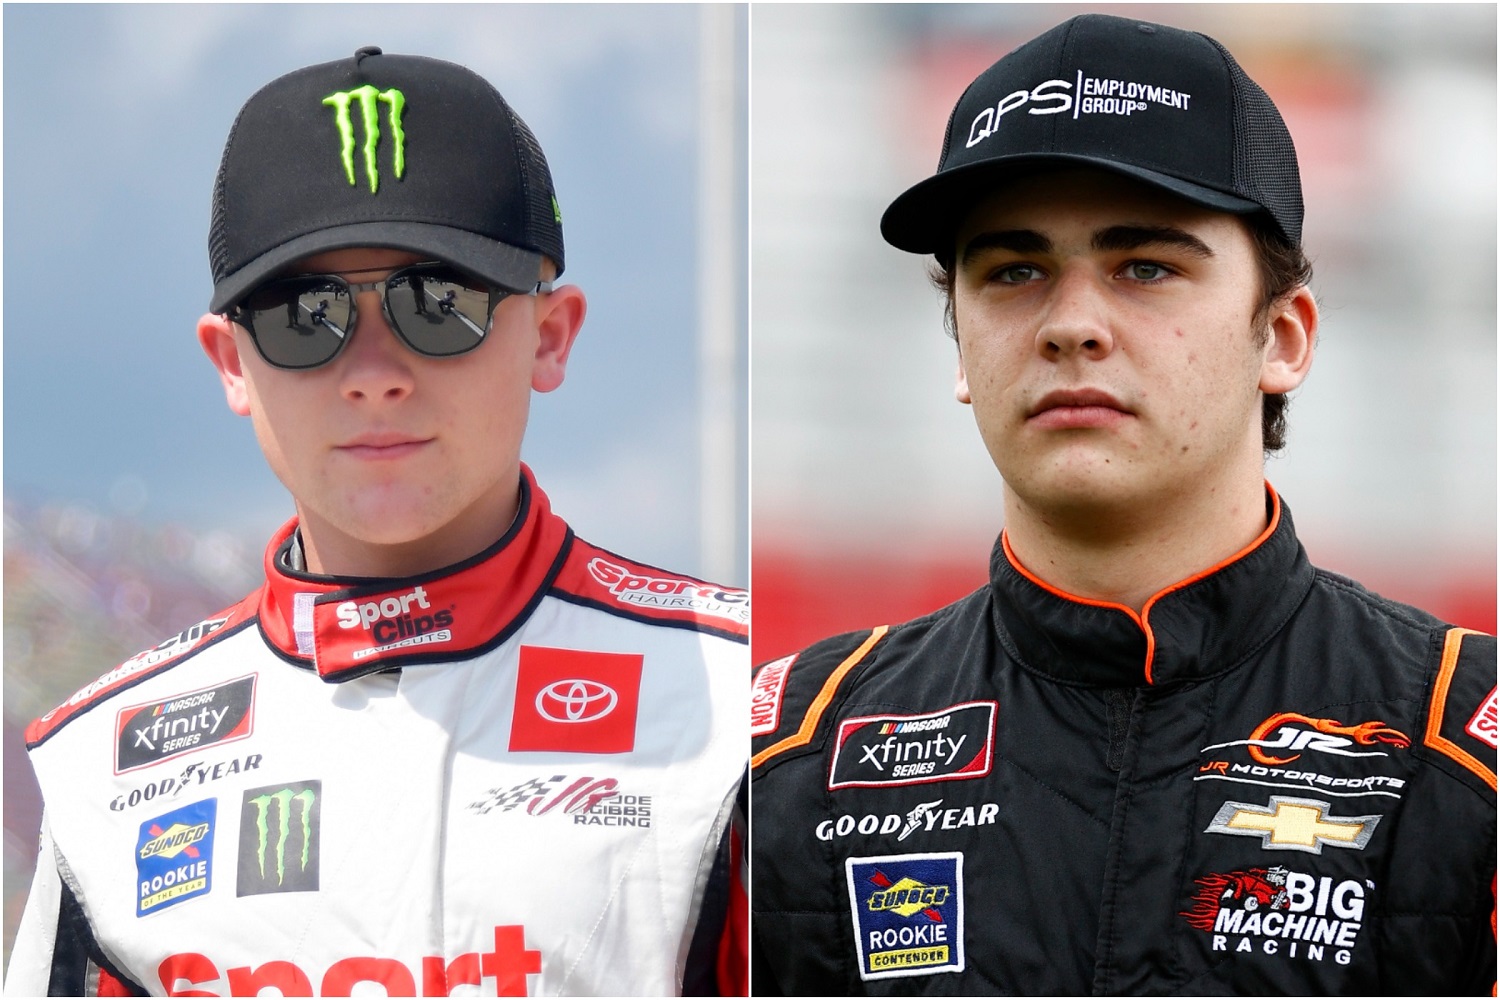 Ty Gibbs and Sam Mayer ran partial seasons in the 2021 Xfinity Series. They will add to an already crowded field of top-tier contenders next year.